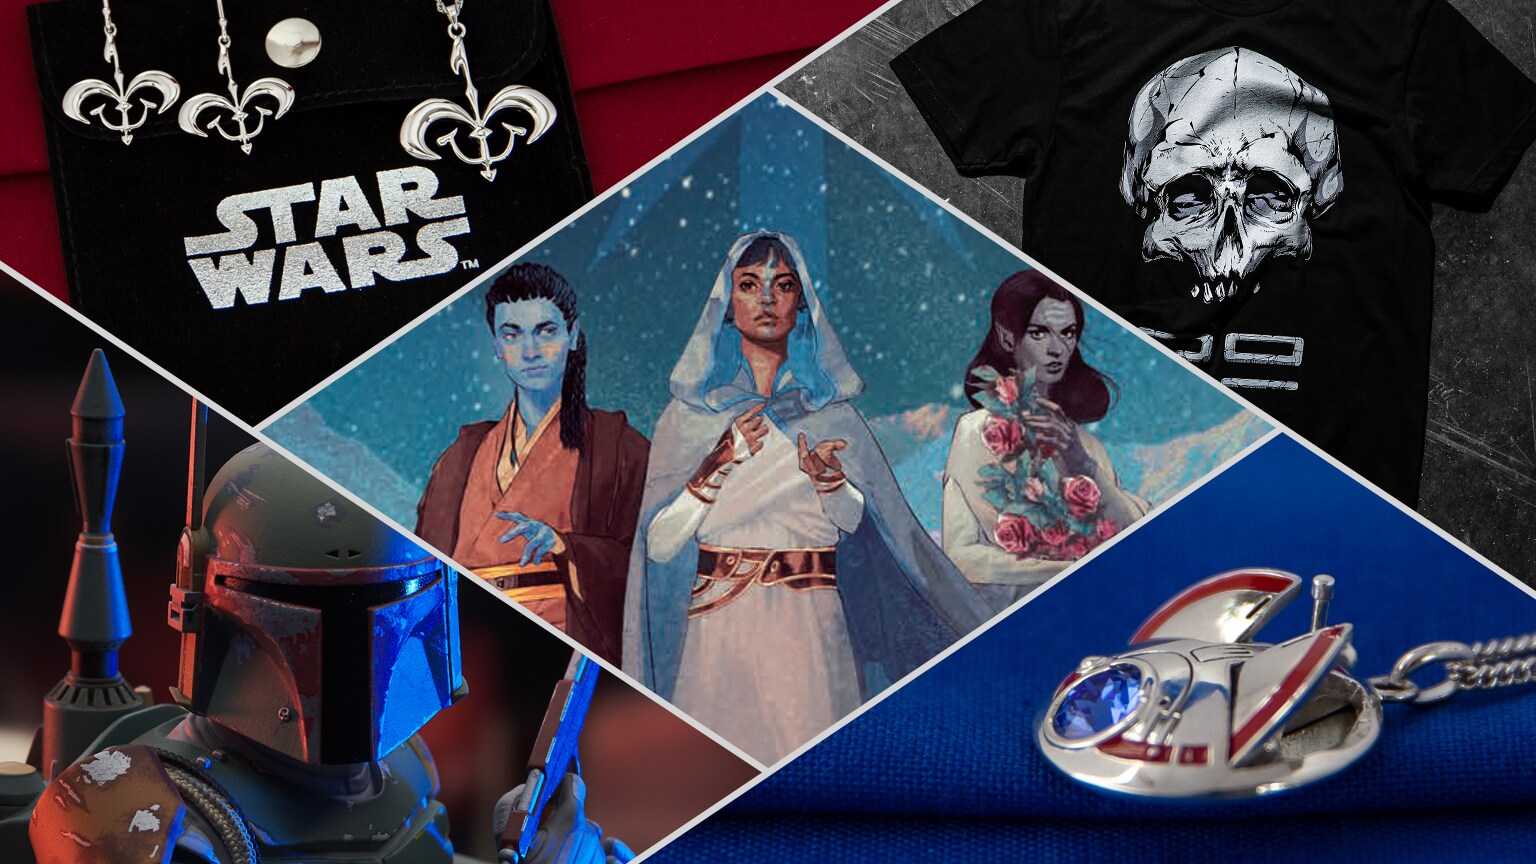 Shop Star Wars Exclusives at New York Comic Con 2022